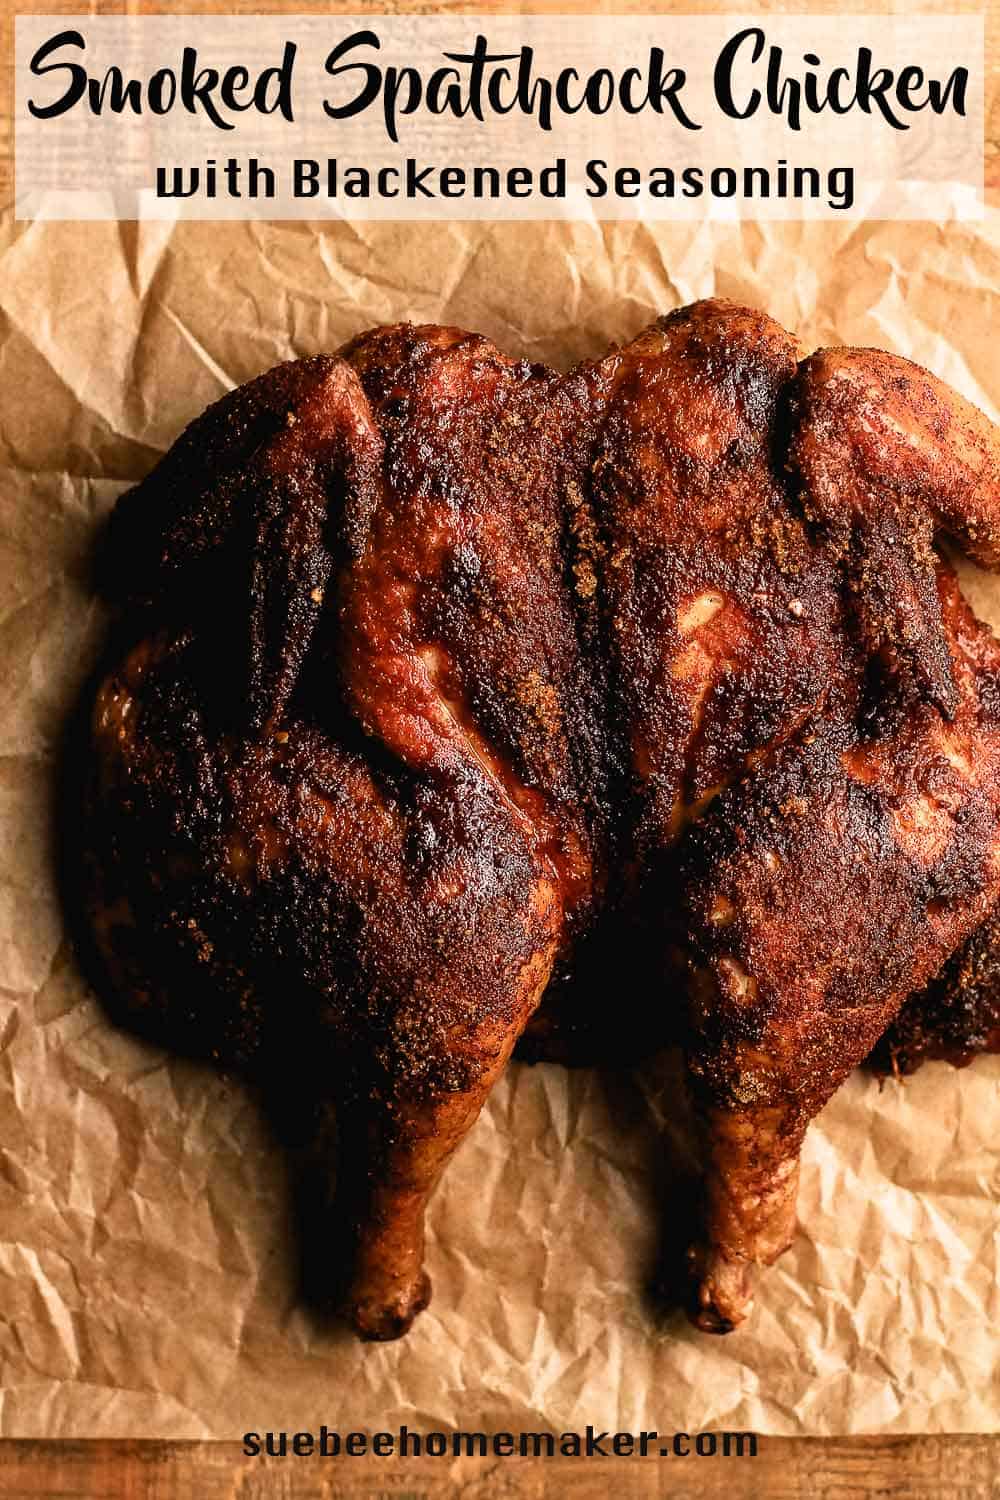 Overhead view of a smoked spatchcock chicken on parchment paper.